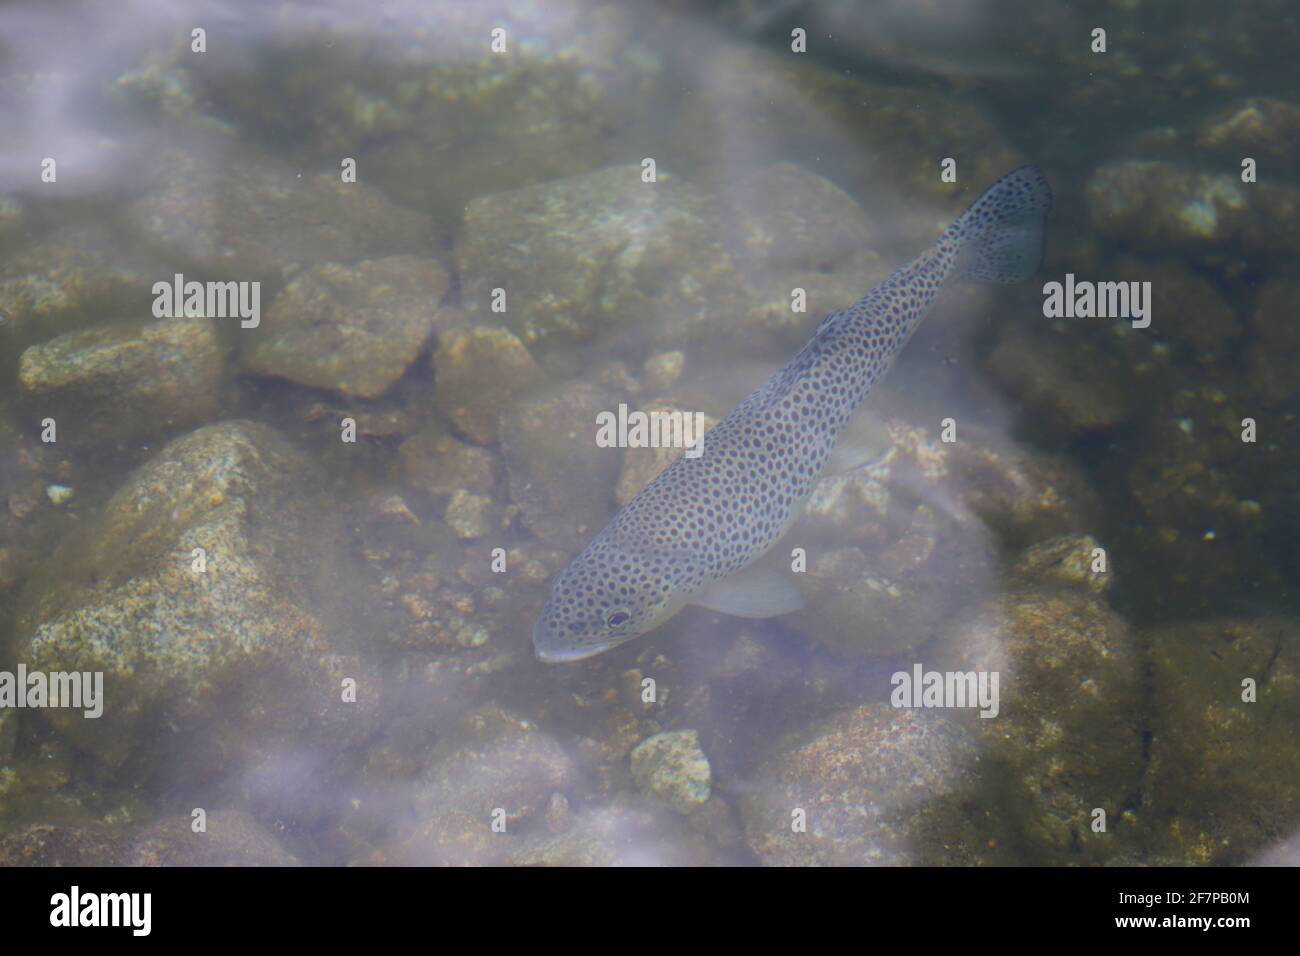 The brown trout or the lake trout in a mountain lake. Fish in Morskie Oko lake in the Tatra National Park, Poland Stock Photo